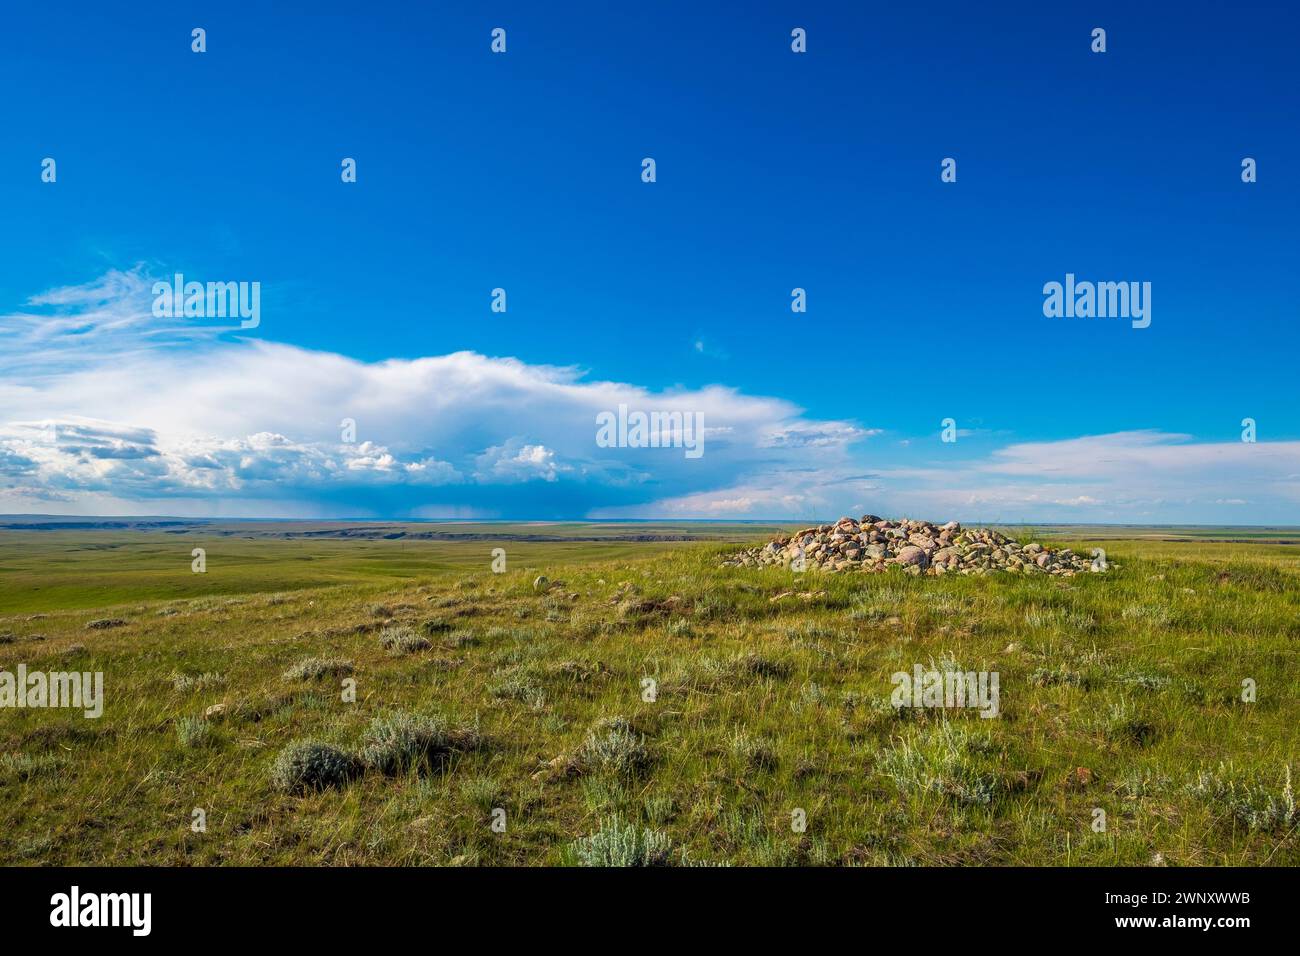 The central stone cairn of the 4500-year old Majorville Medicine Wheel archaeological site overlooking the prairies of southern Alberta Stock Photo